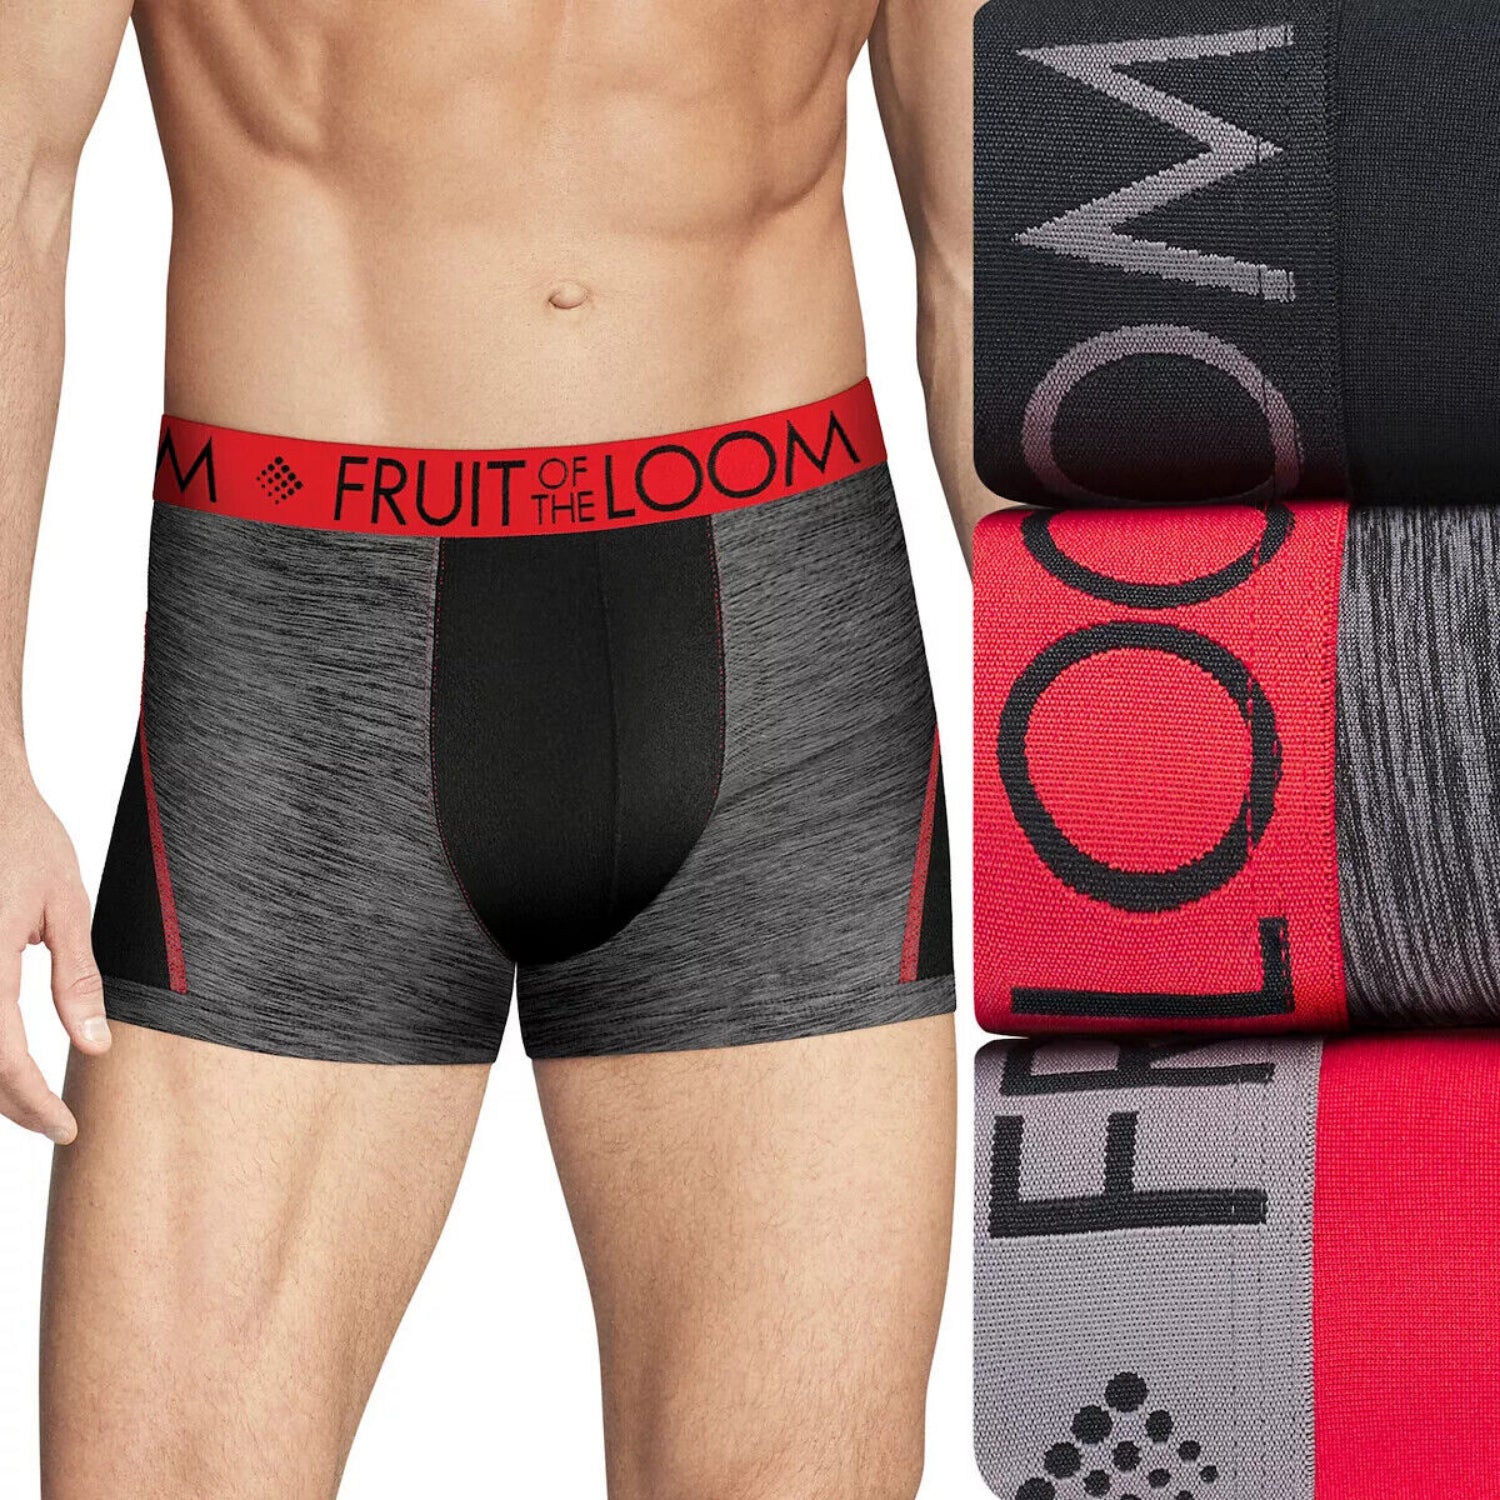 Fruit of the Loom Men's Breathable Boxer Briefs, 3-Pack 